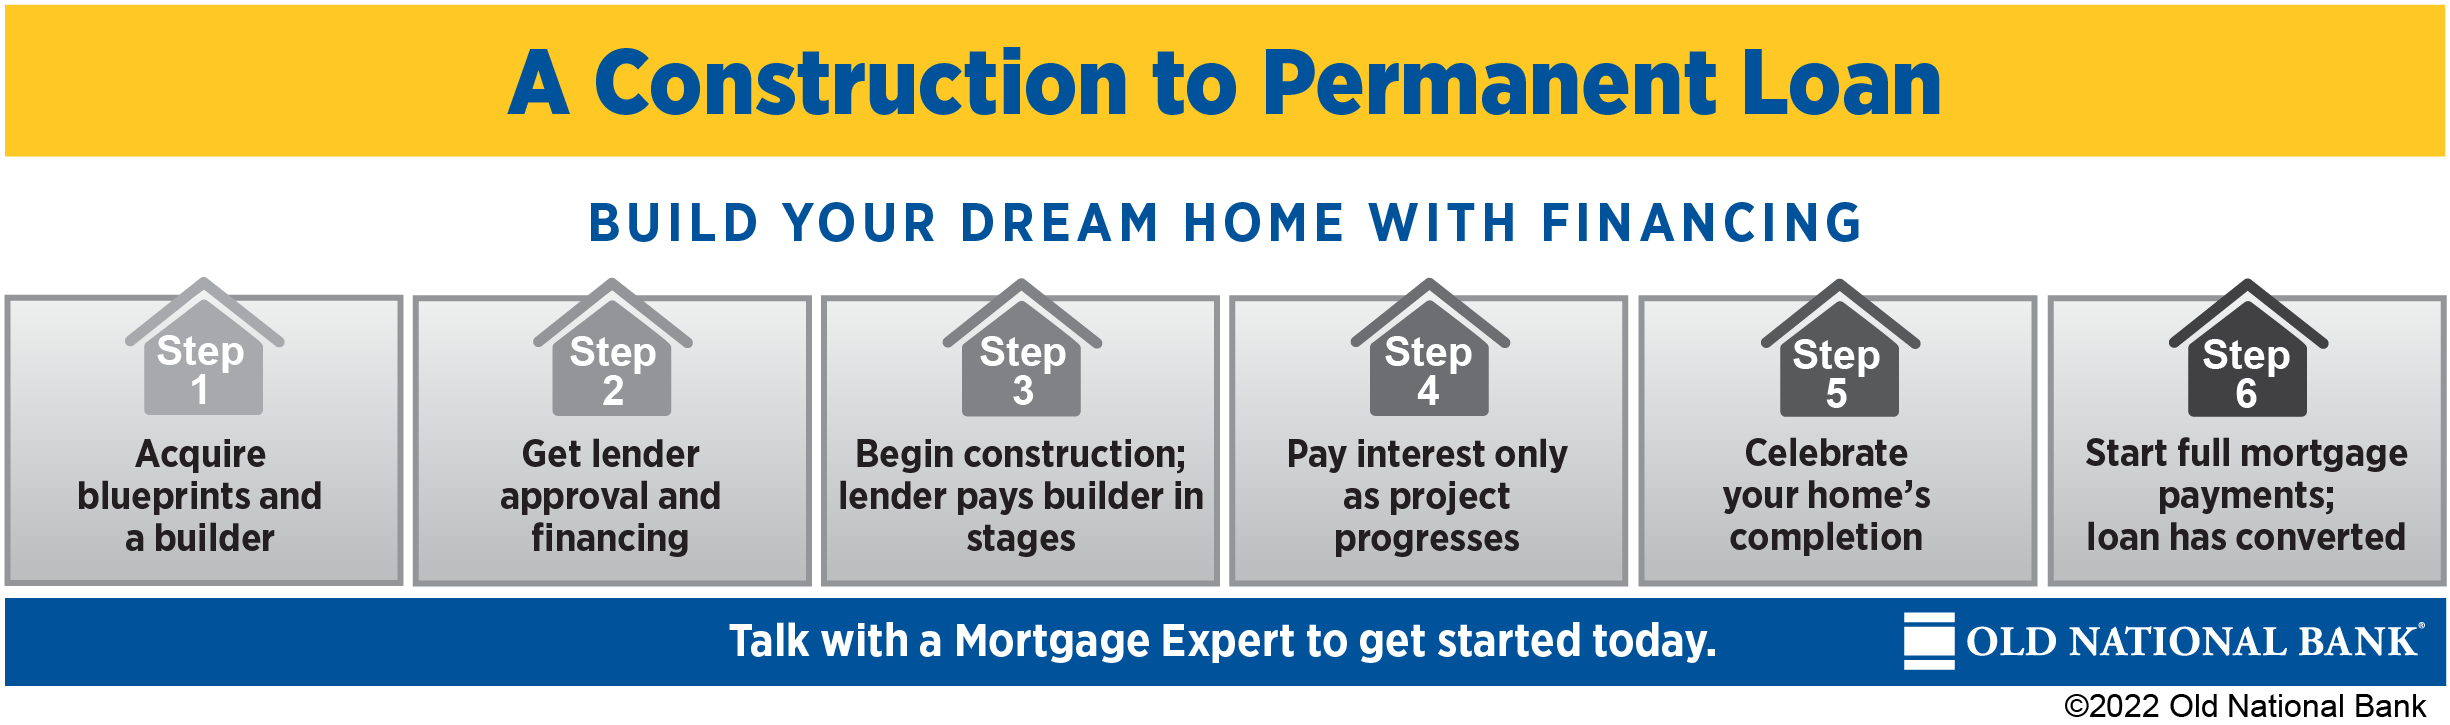 A Construction to Permanent Loan Infographic